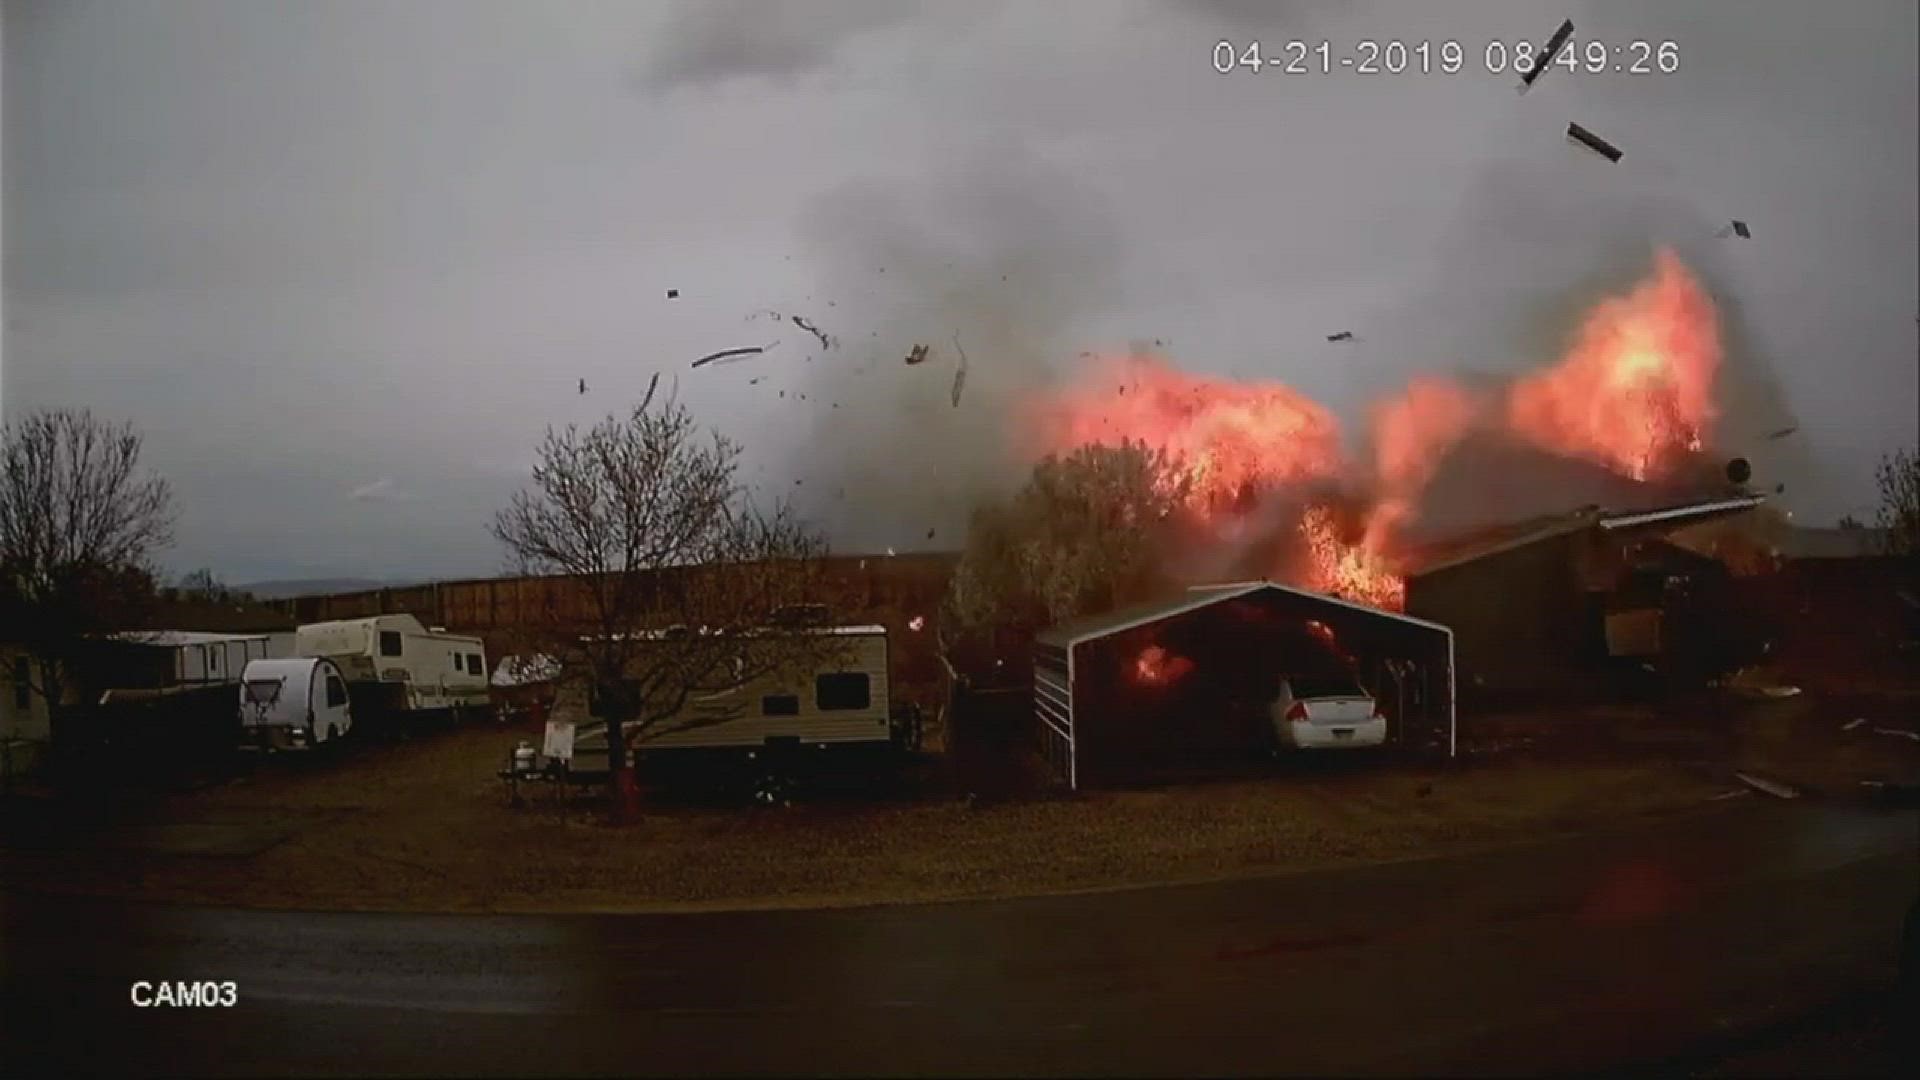 A home exploded Sunday in Mack, Colorado. Two people were injured but survived, according to KKCO in Grand Junction.